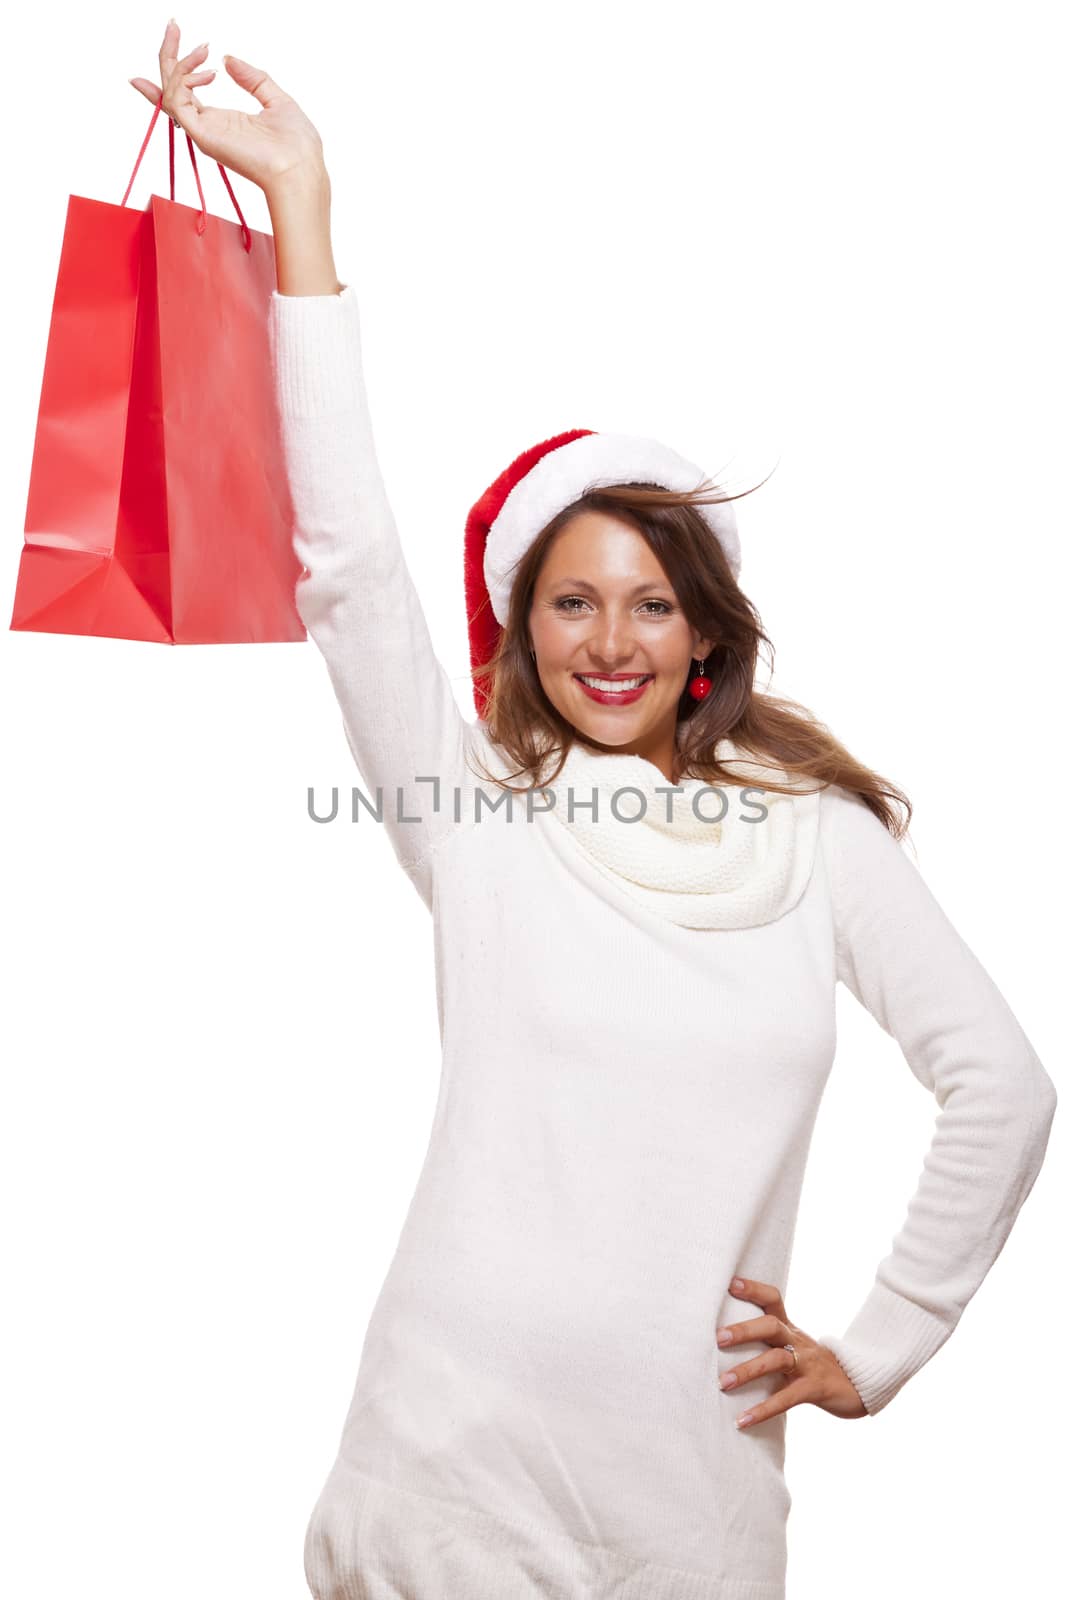 Happy vivacious Christmas shopper wearing a red Santa hat holding up a colorful red shopping bag with a beautiful beaming smile, isolated on white with copyspace